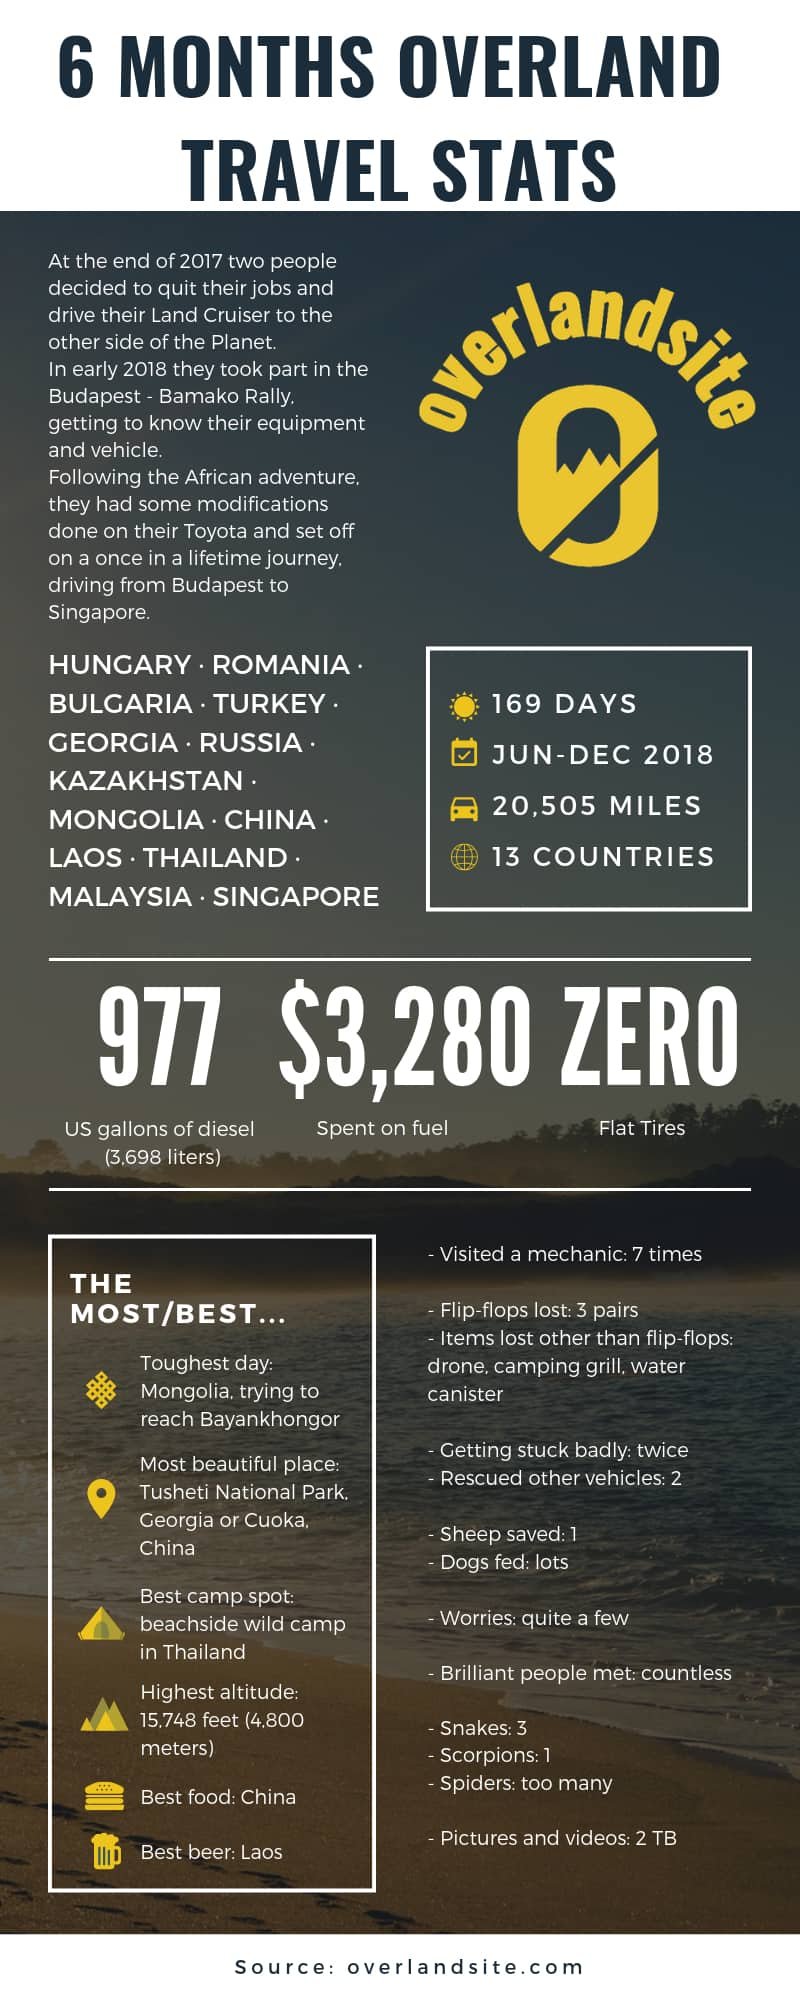 6 months overland journey infographic